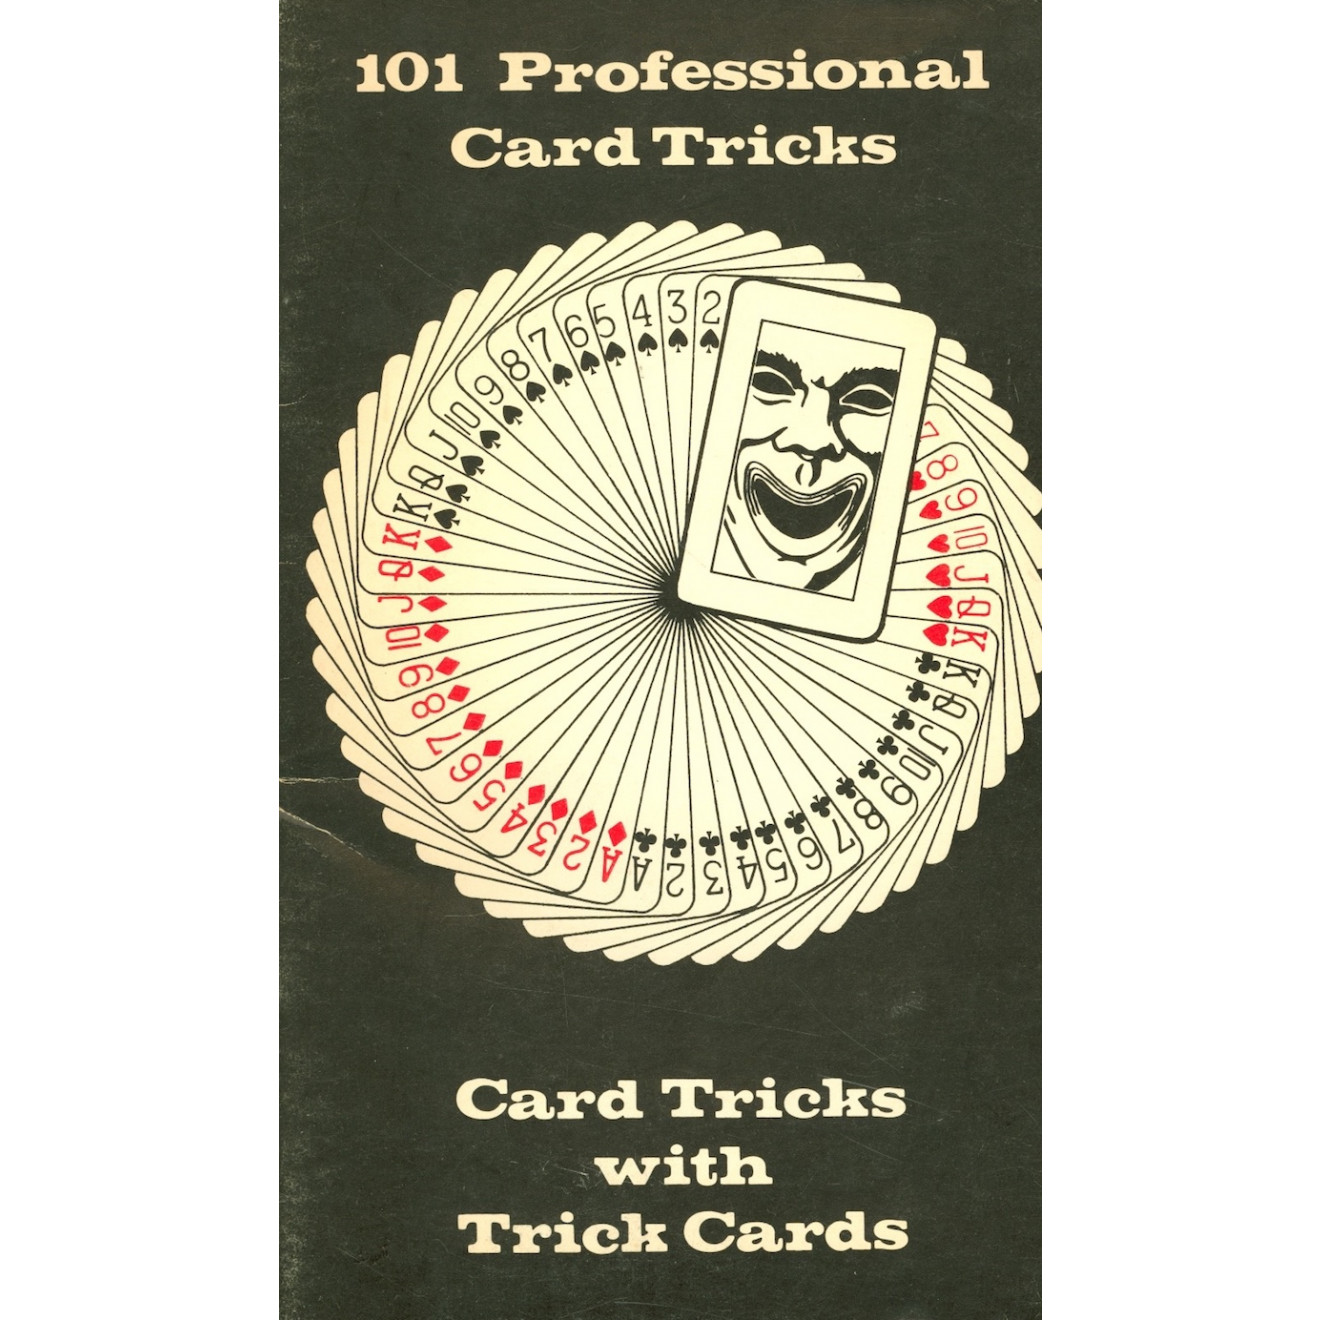 101 Professional Card Tricks Card Tricks With Trick Cards 101 Professional Card Tricks – Card Tricks With Trick Cards (John FabJance)